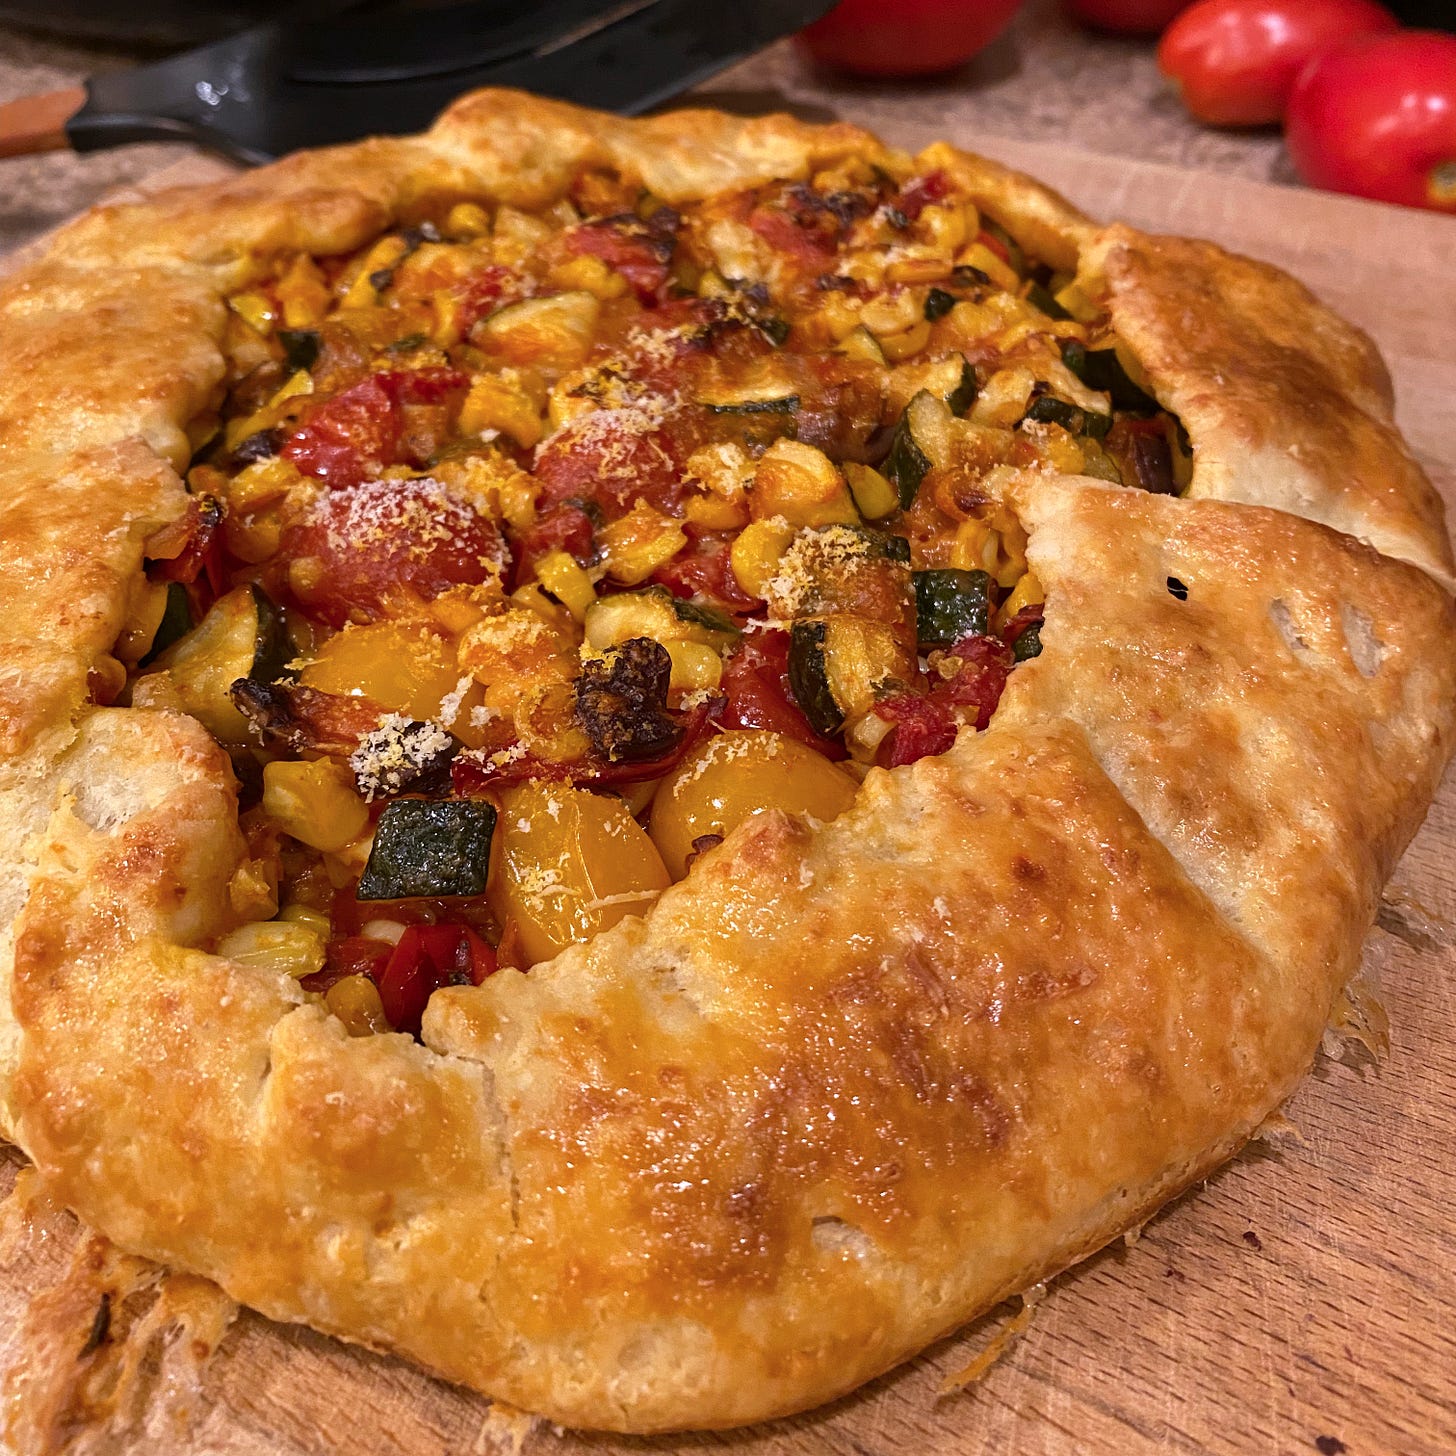 A golden brown galette on a cutting board, filled with a mix of orange and red grape tomatoes, pieces of corn, zucchini, and olives. Grated parmesan lightly covers the top.